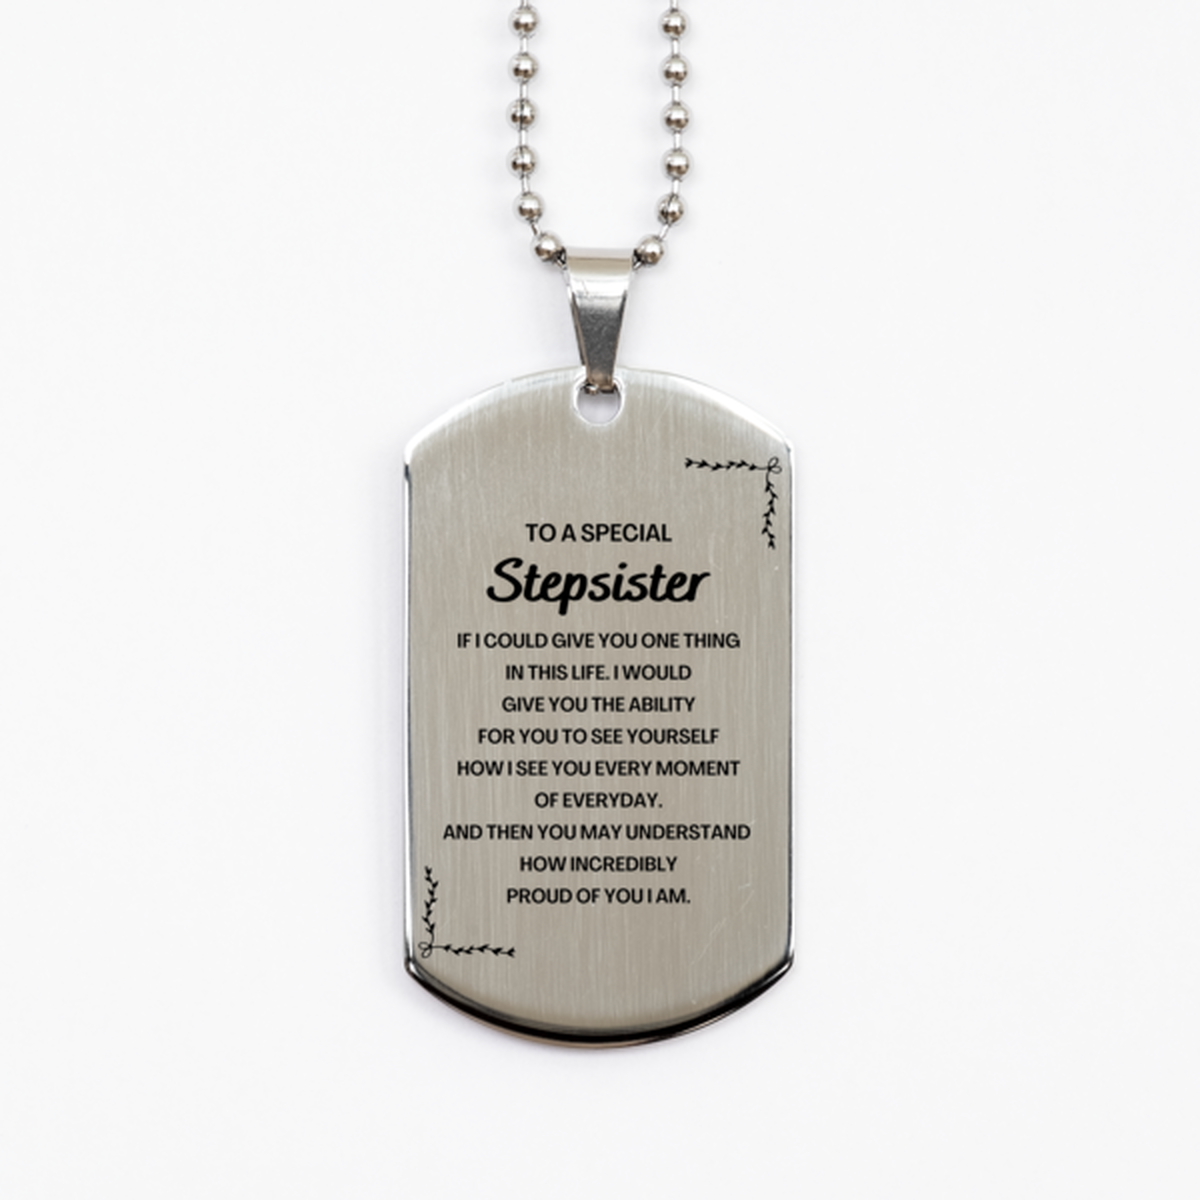 To My Stepsister Silver Dog Tag, Gifts For Stepsister Engraved, Inspirational Gifts for Christmas Birthday, Epic Gifts for Stepsister To A Special Stepsister how incredibly proud of you I am